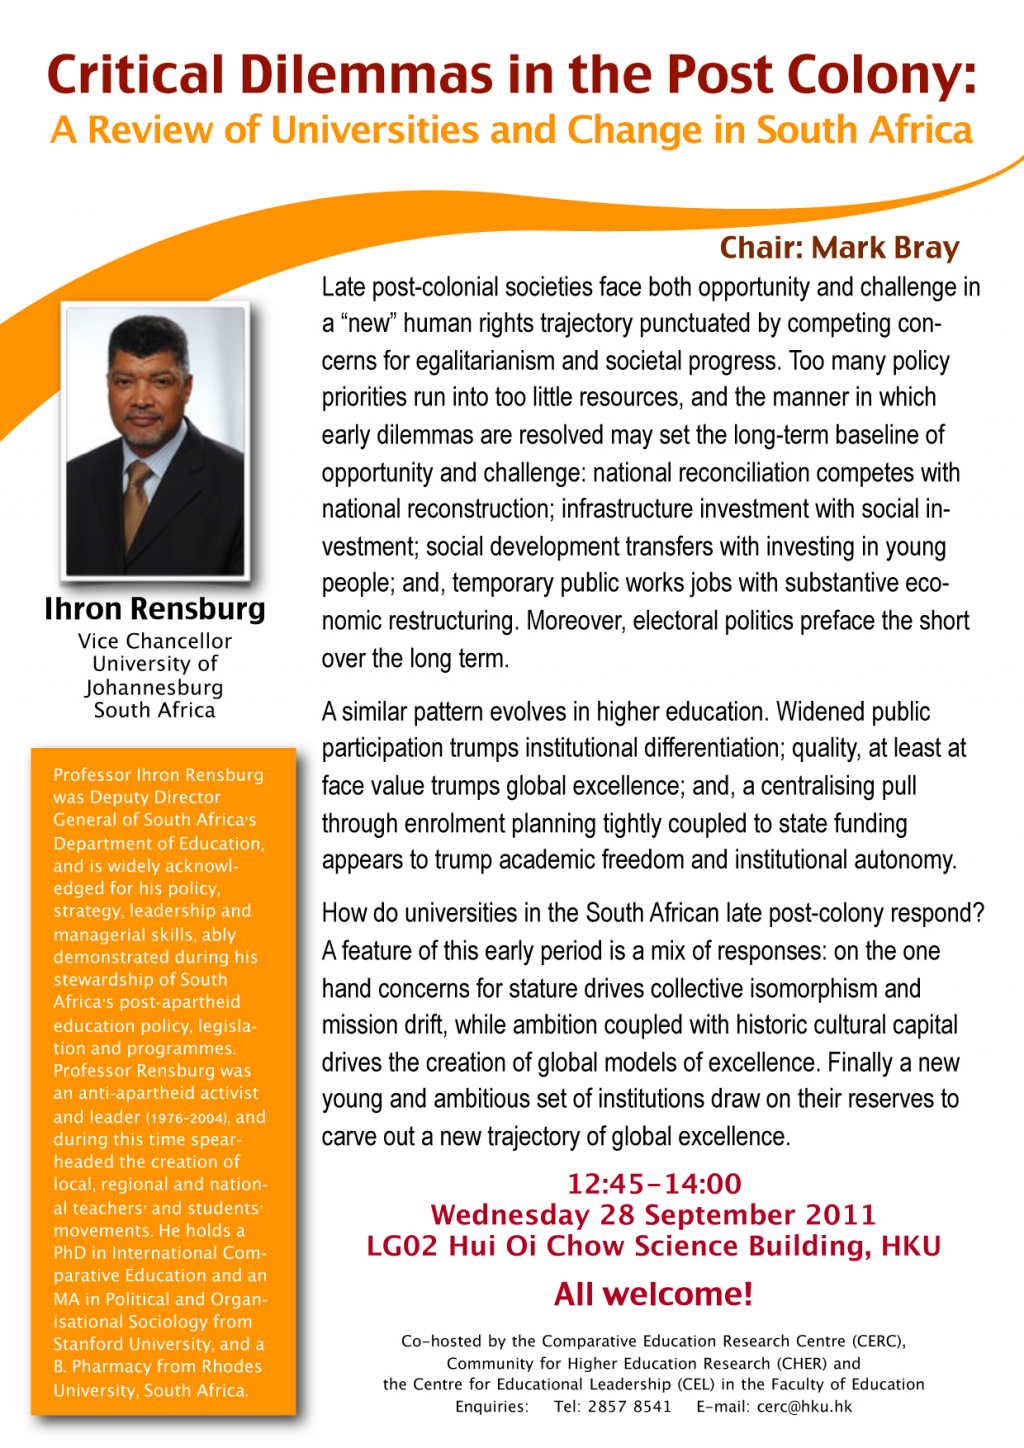 Seminar: Critical Dilemmas in the Post Colony: A Review of Universities and Change in South Africa